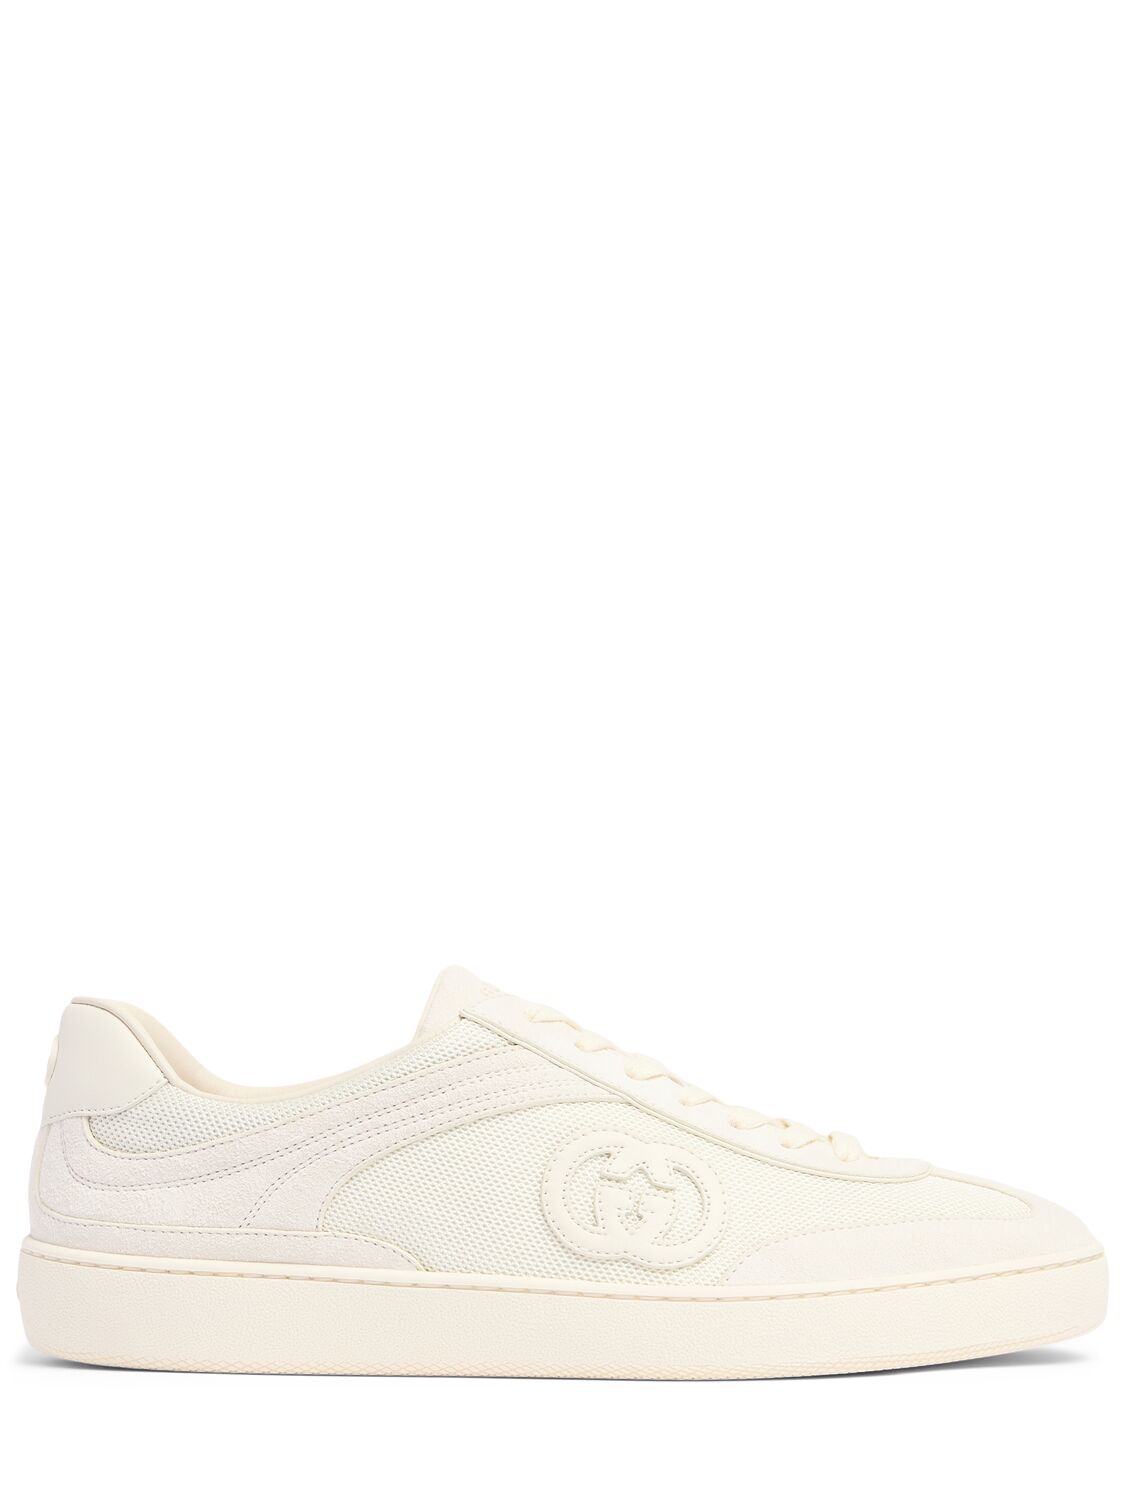 Gucci G74 Gg Suede & Fabric Trainers In Off White